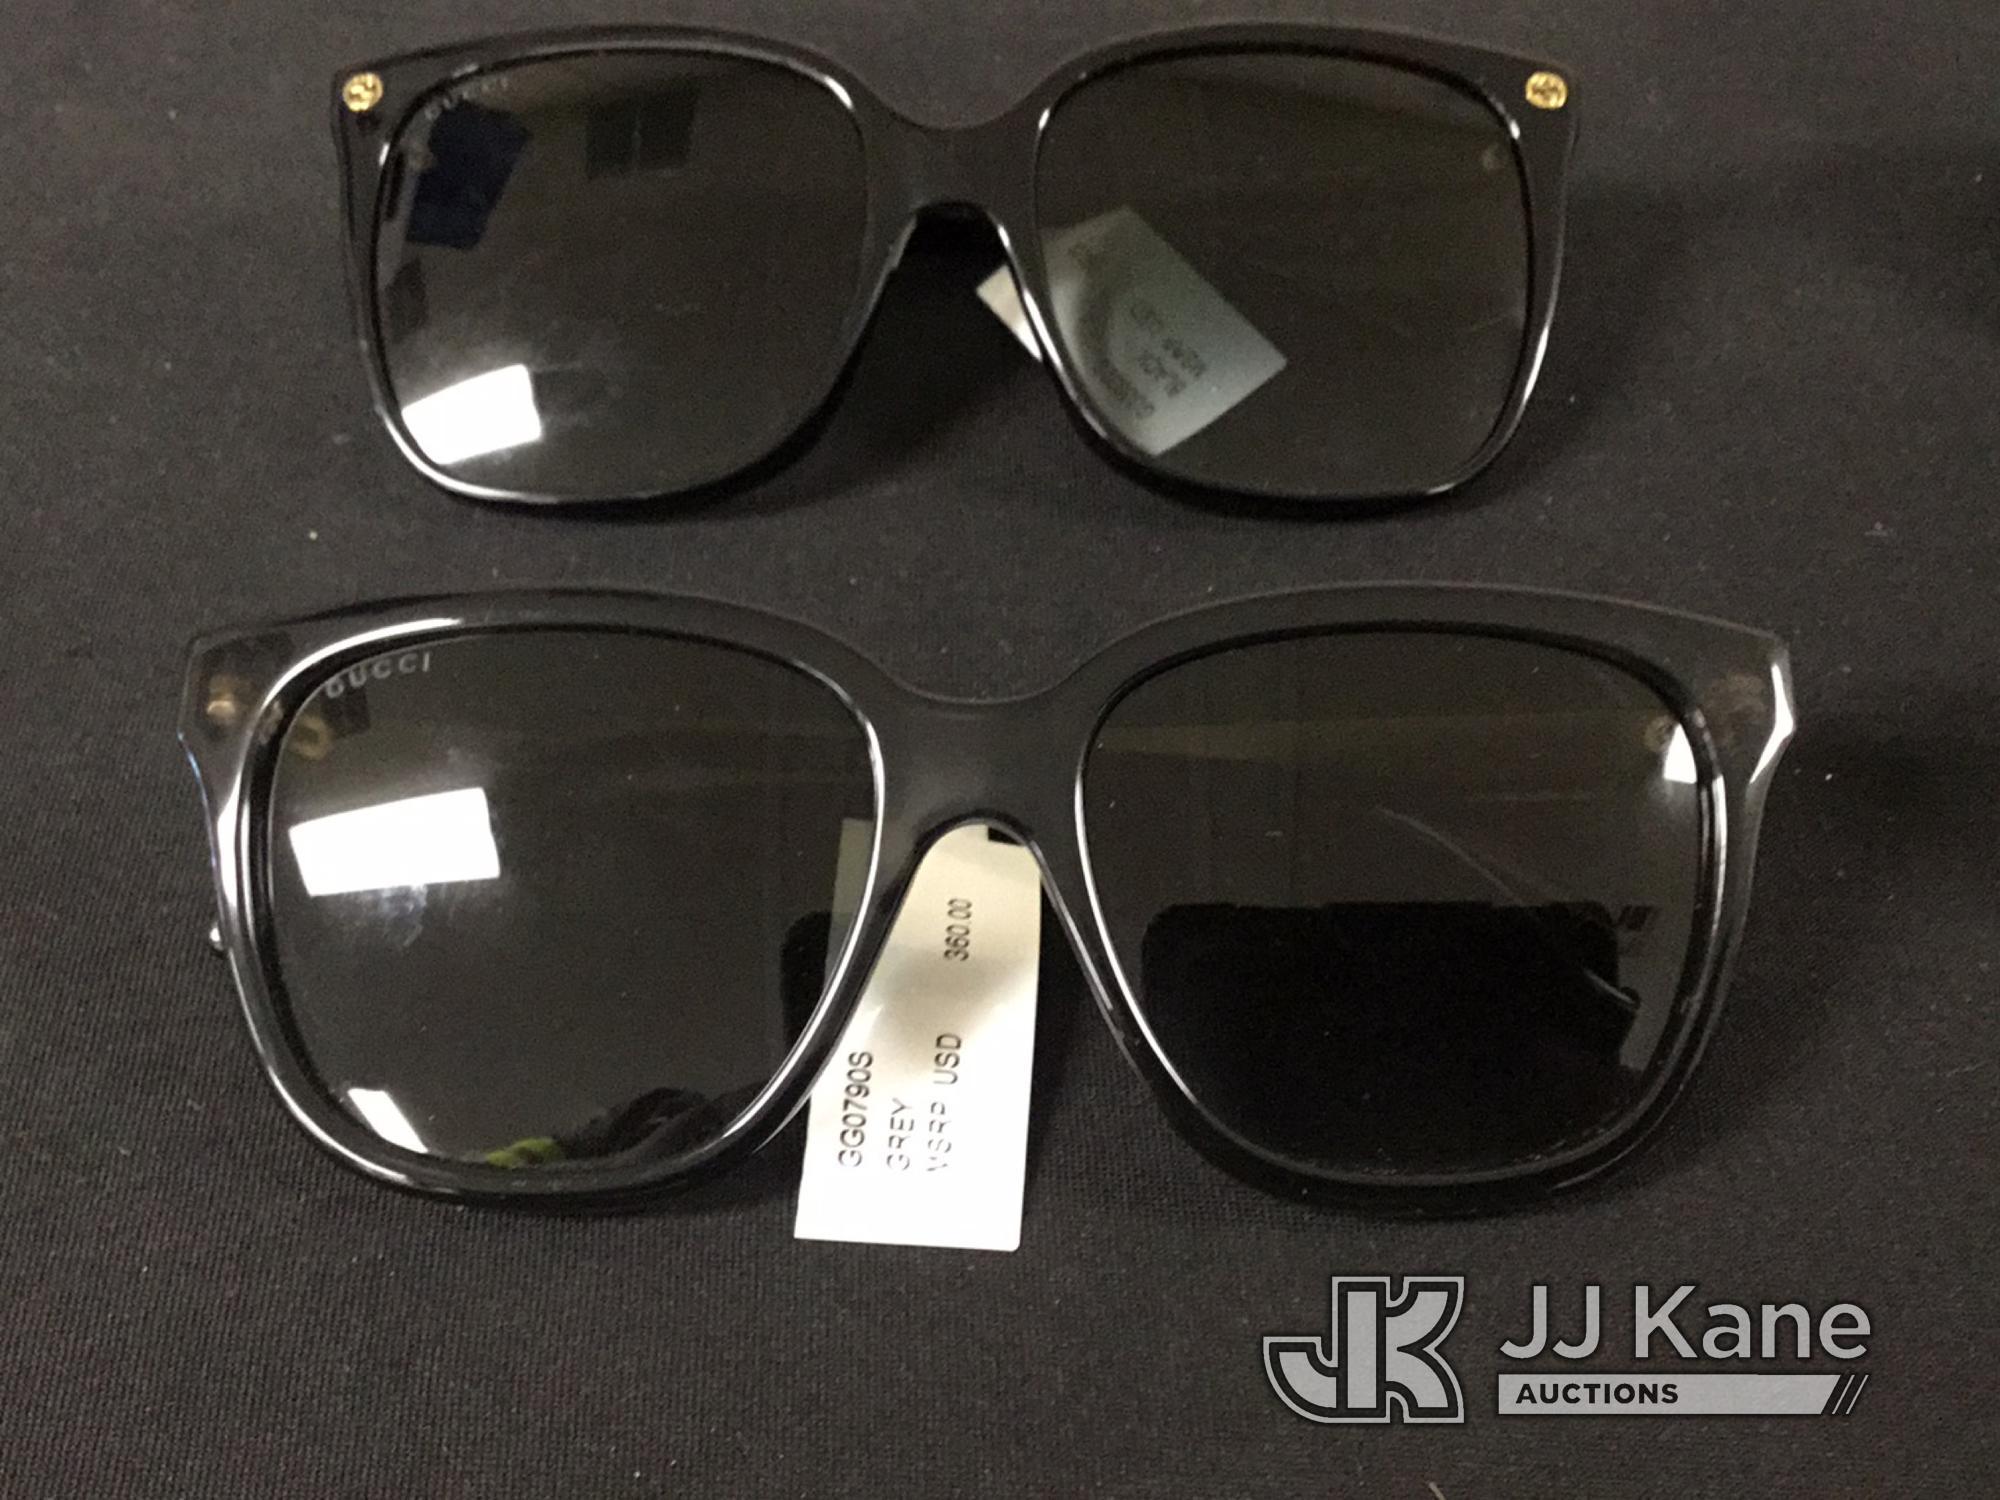 (Jurupa Valley, CA) Sunglasses lot | authenticity unknown (New) NOTE: This unit is being sold AS IS/